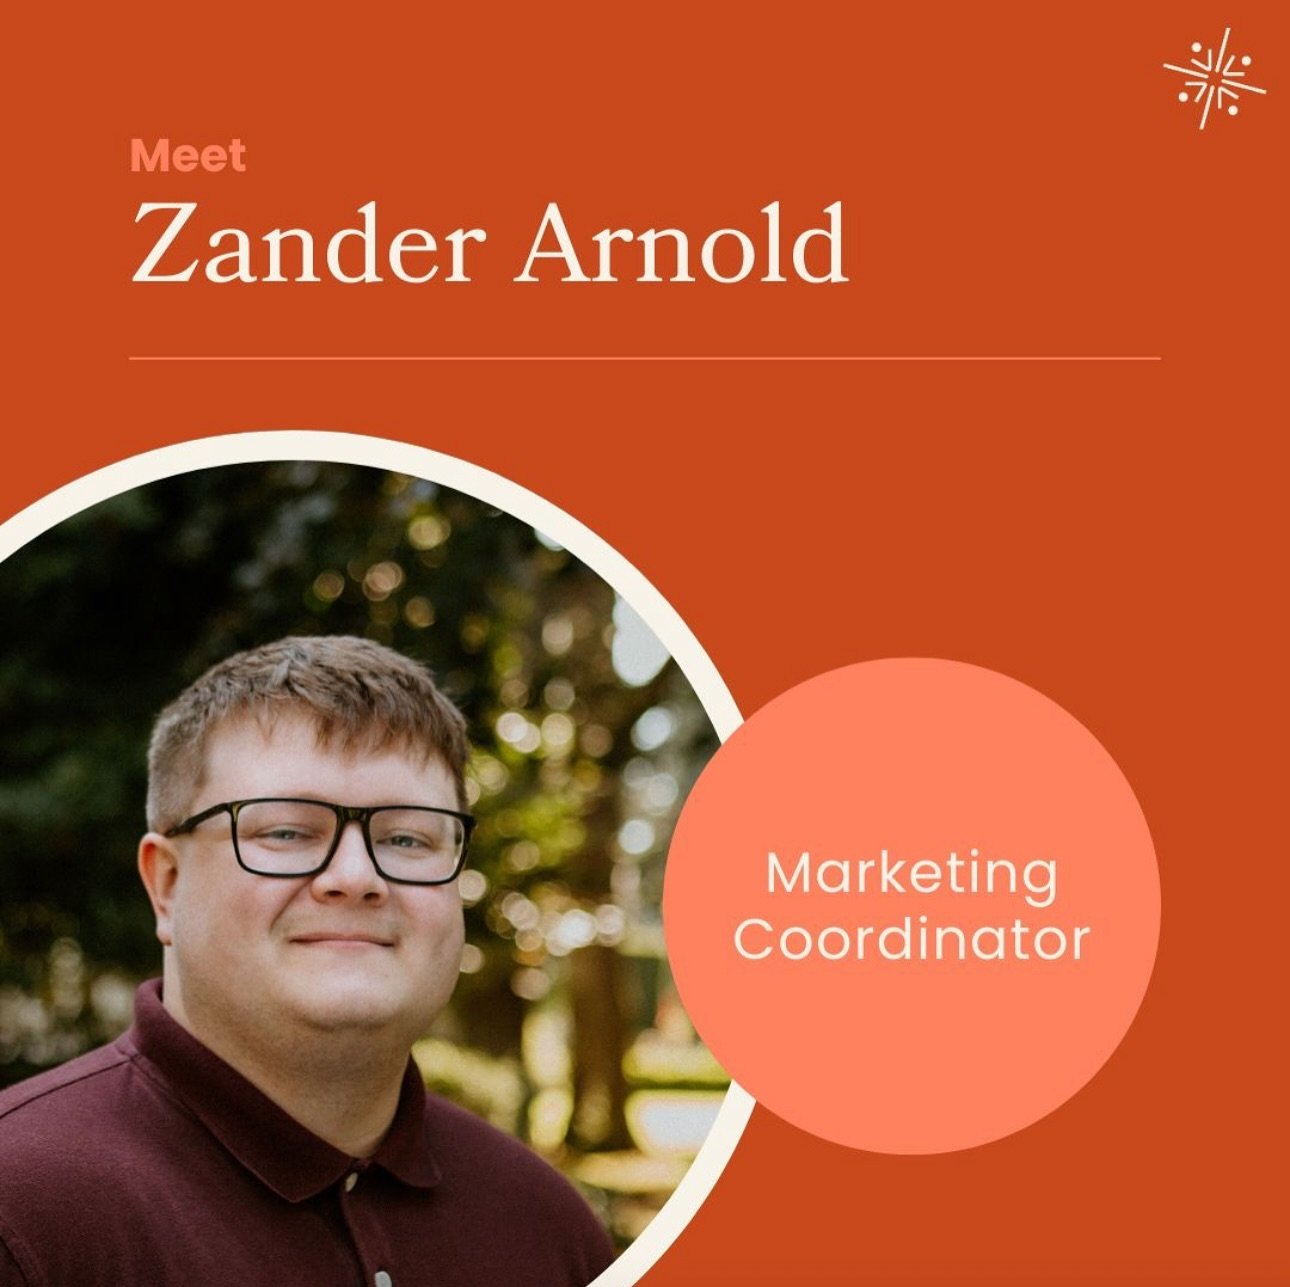 Meet Zander Arnold ✨

We first met Zander as an intern on the Interstate Bridge Replacement program (IBR). His captivating personality and innovative ideas led him to PointNorth where he is now our team&rsquo;s Marketing Coordinator. Zander fuses cre